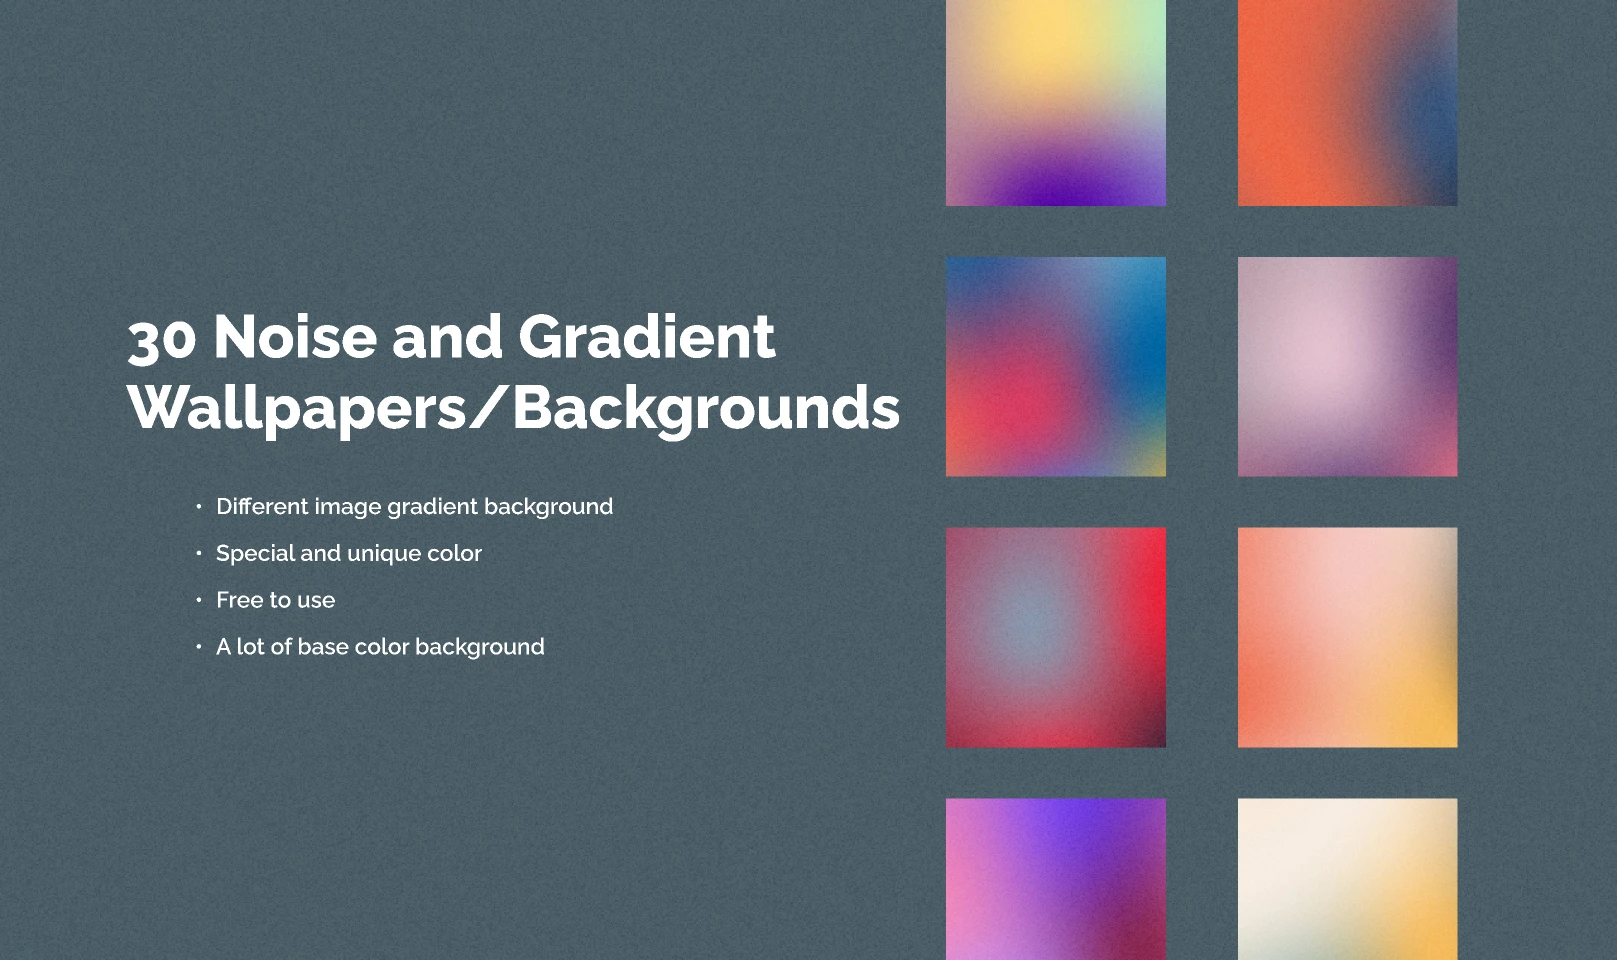 30 Noise and Gradient Wallpapers/Background for Figma and Adobe XD